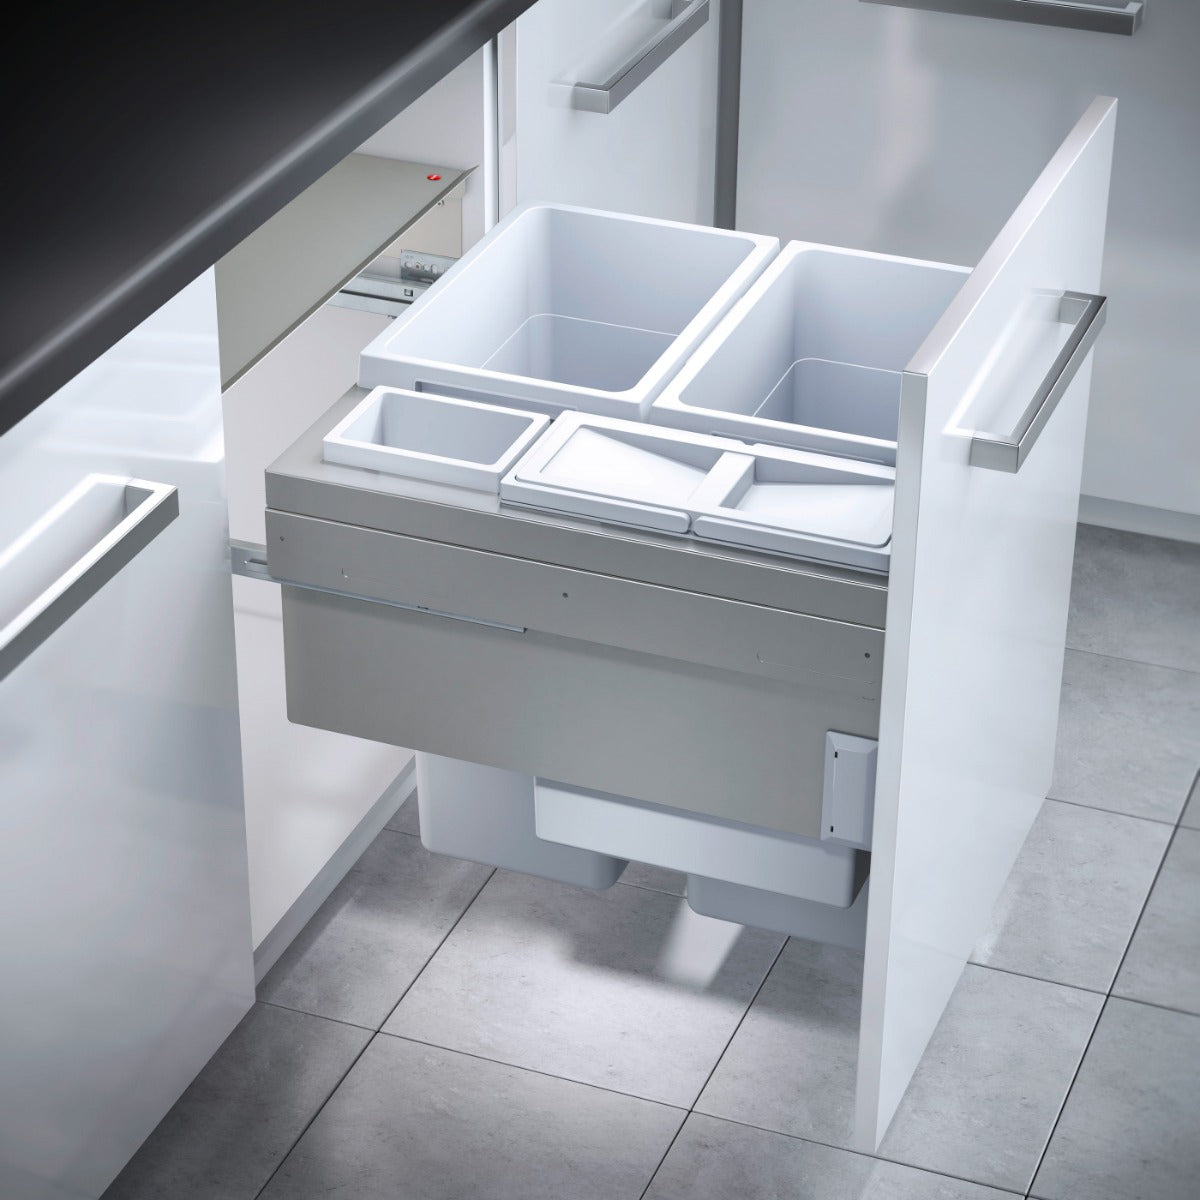 Hailo Euro Cargo 4 Compartment 90L integrated kitchen recycling bin for easy recycling and waste disposal in a 600mm cabinet with pull-out doors.